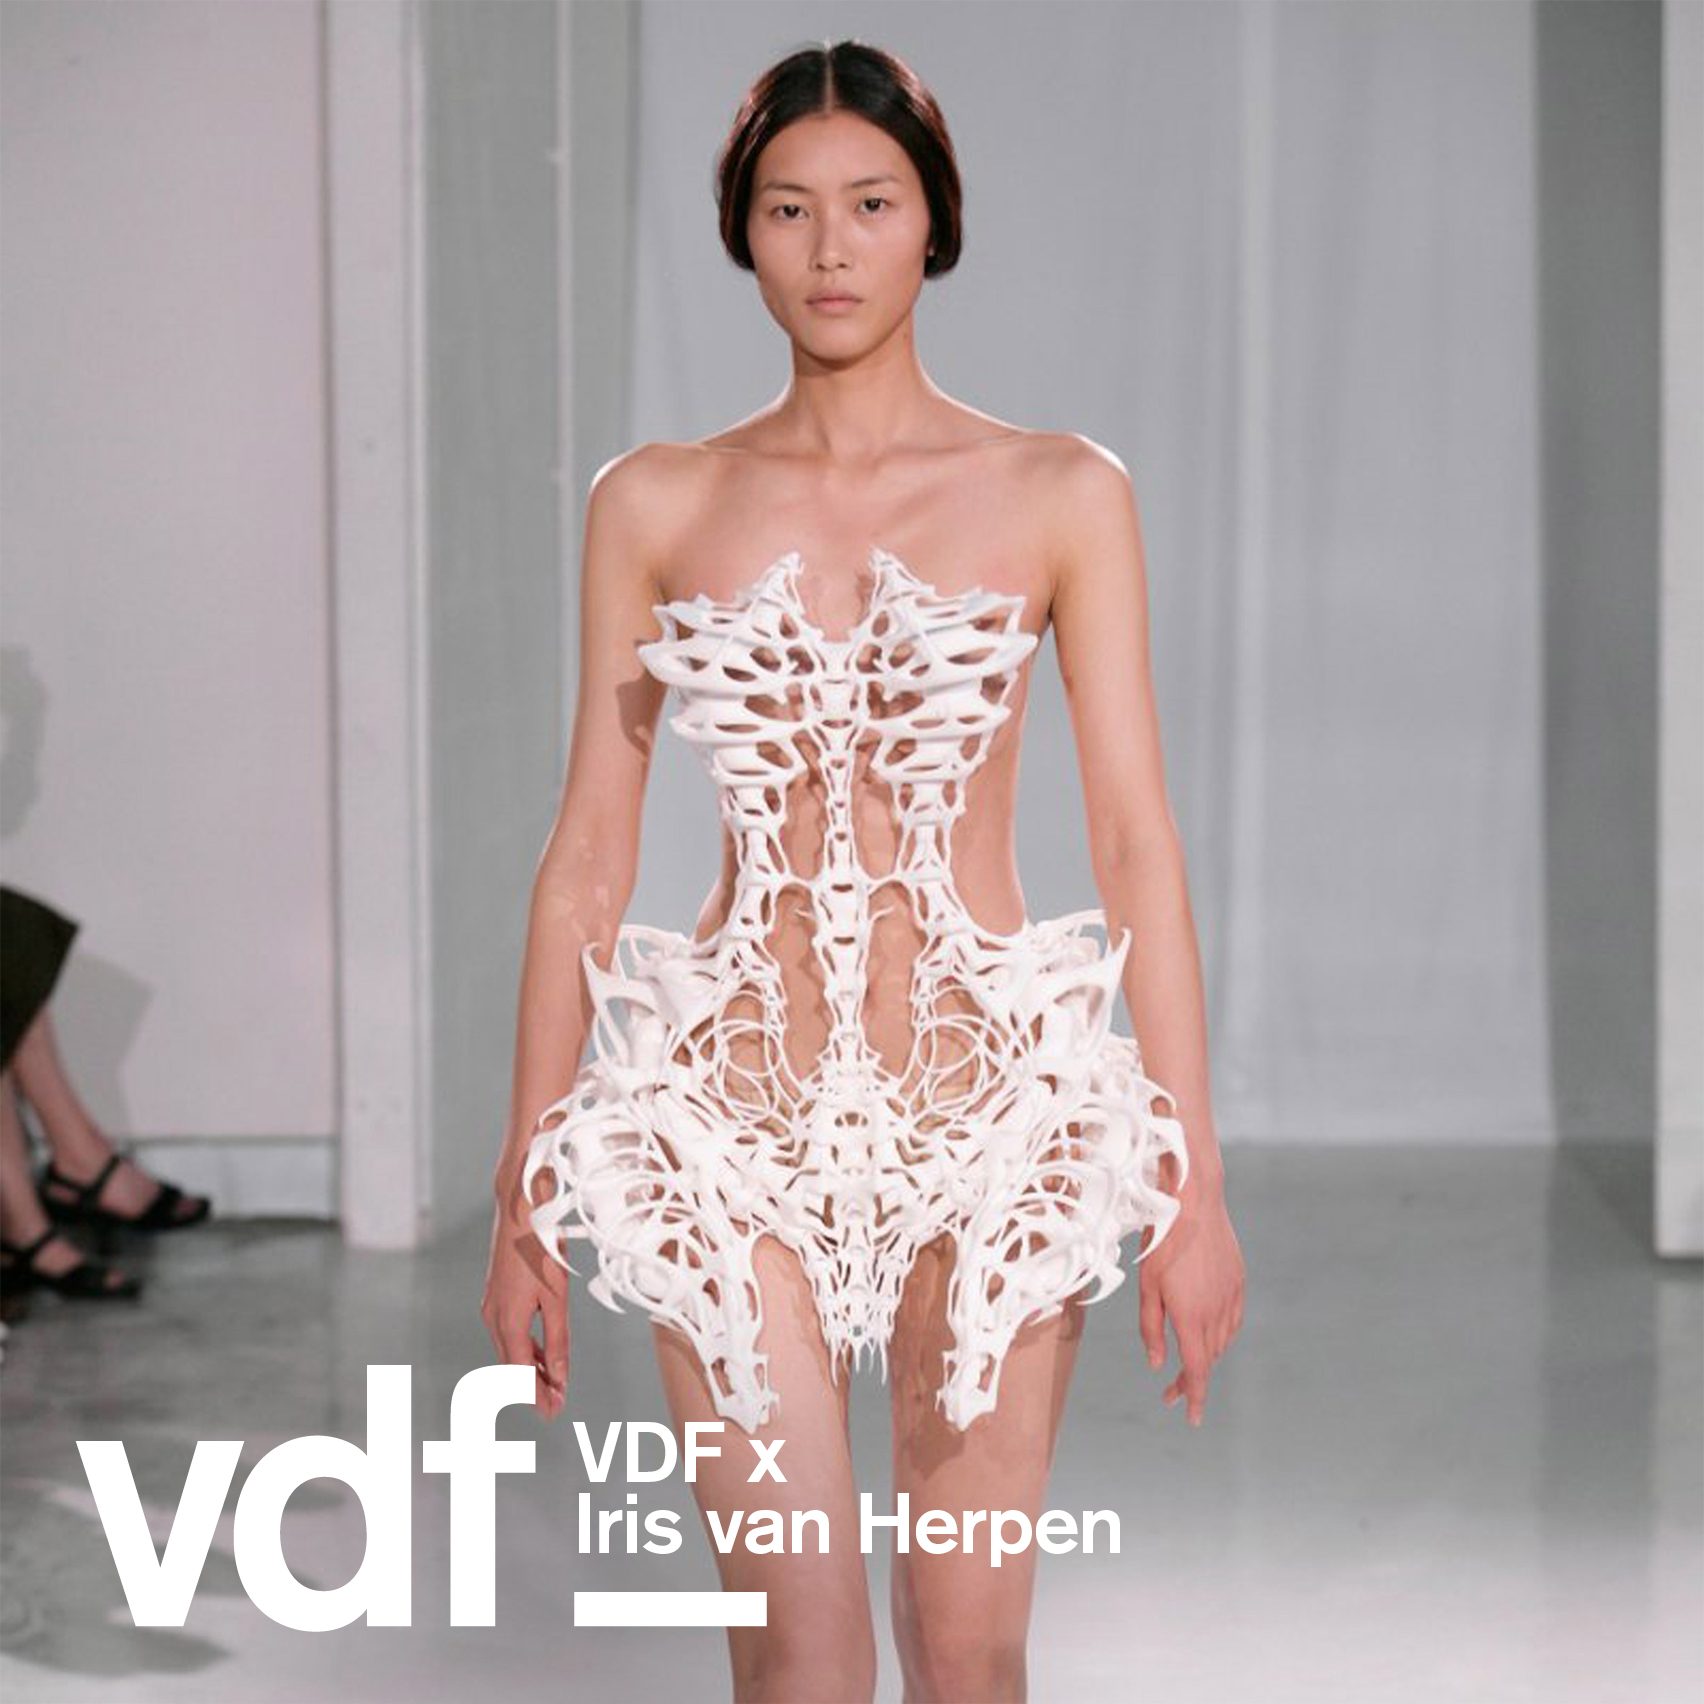 The Infinity Dress Is The Most Difficult I Have Ever Made Says Iris Van Herpen